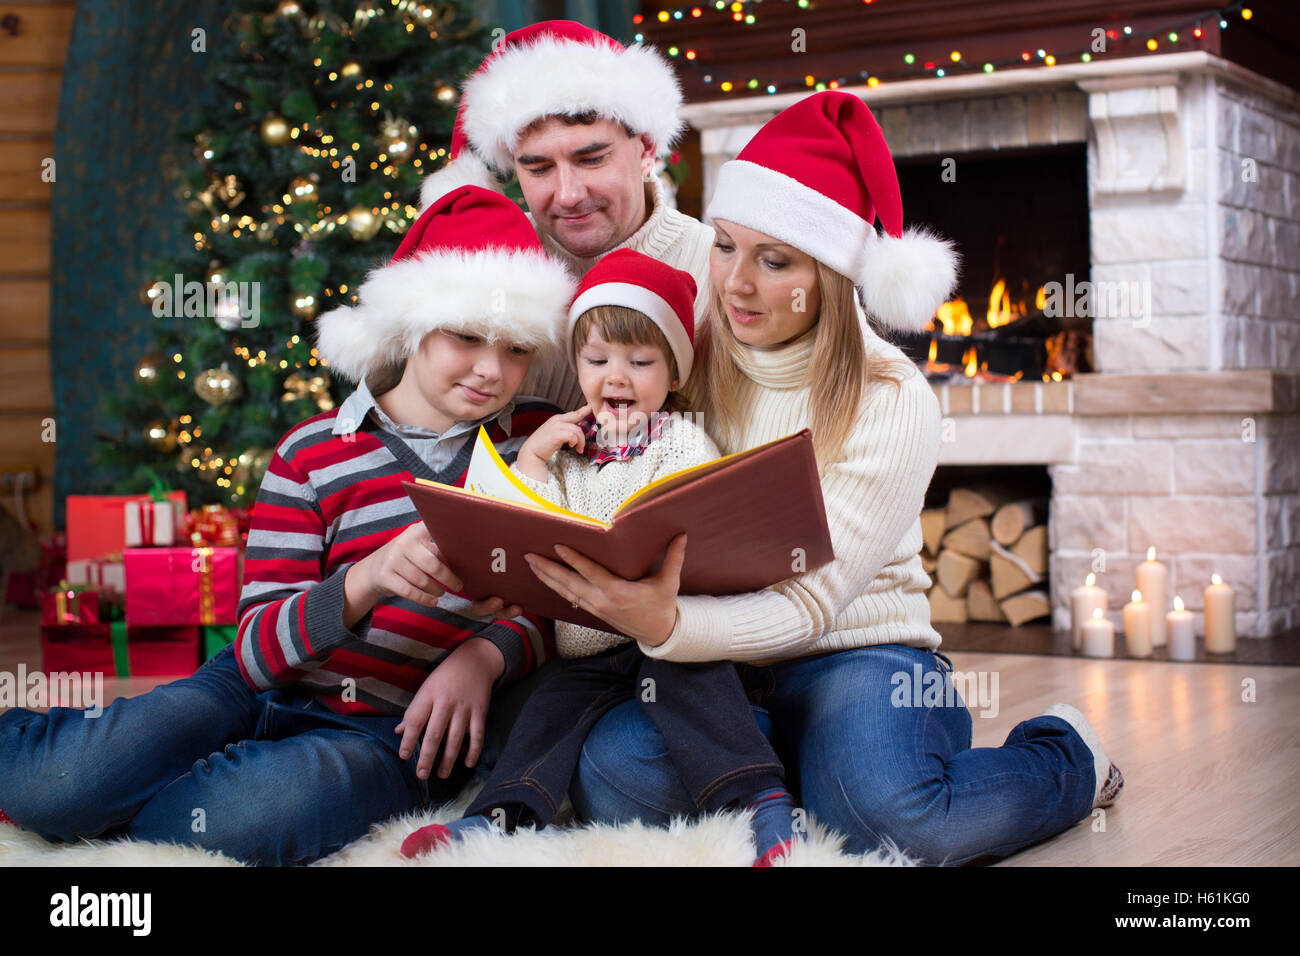 Family read stories sitting on sofa in front of fireplace in Christmas decorated house interior Stock Photo